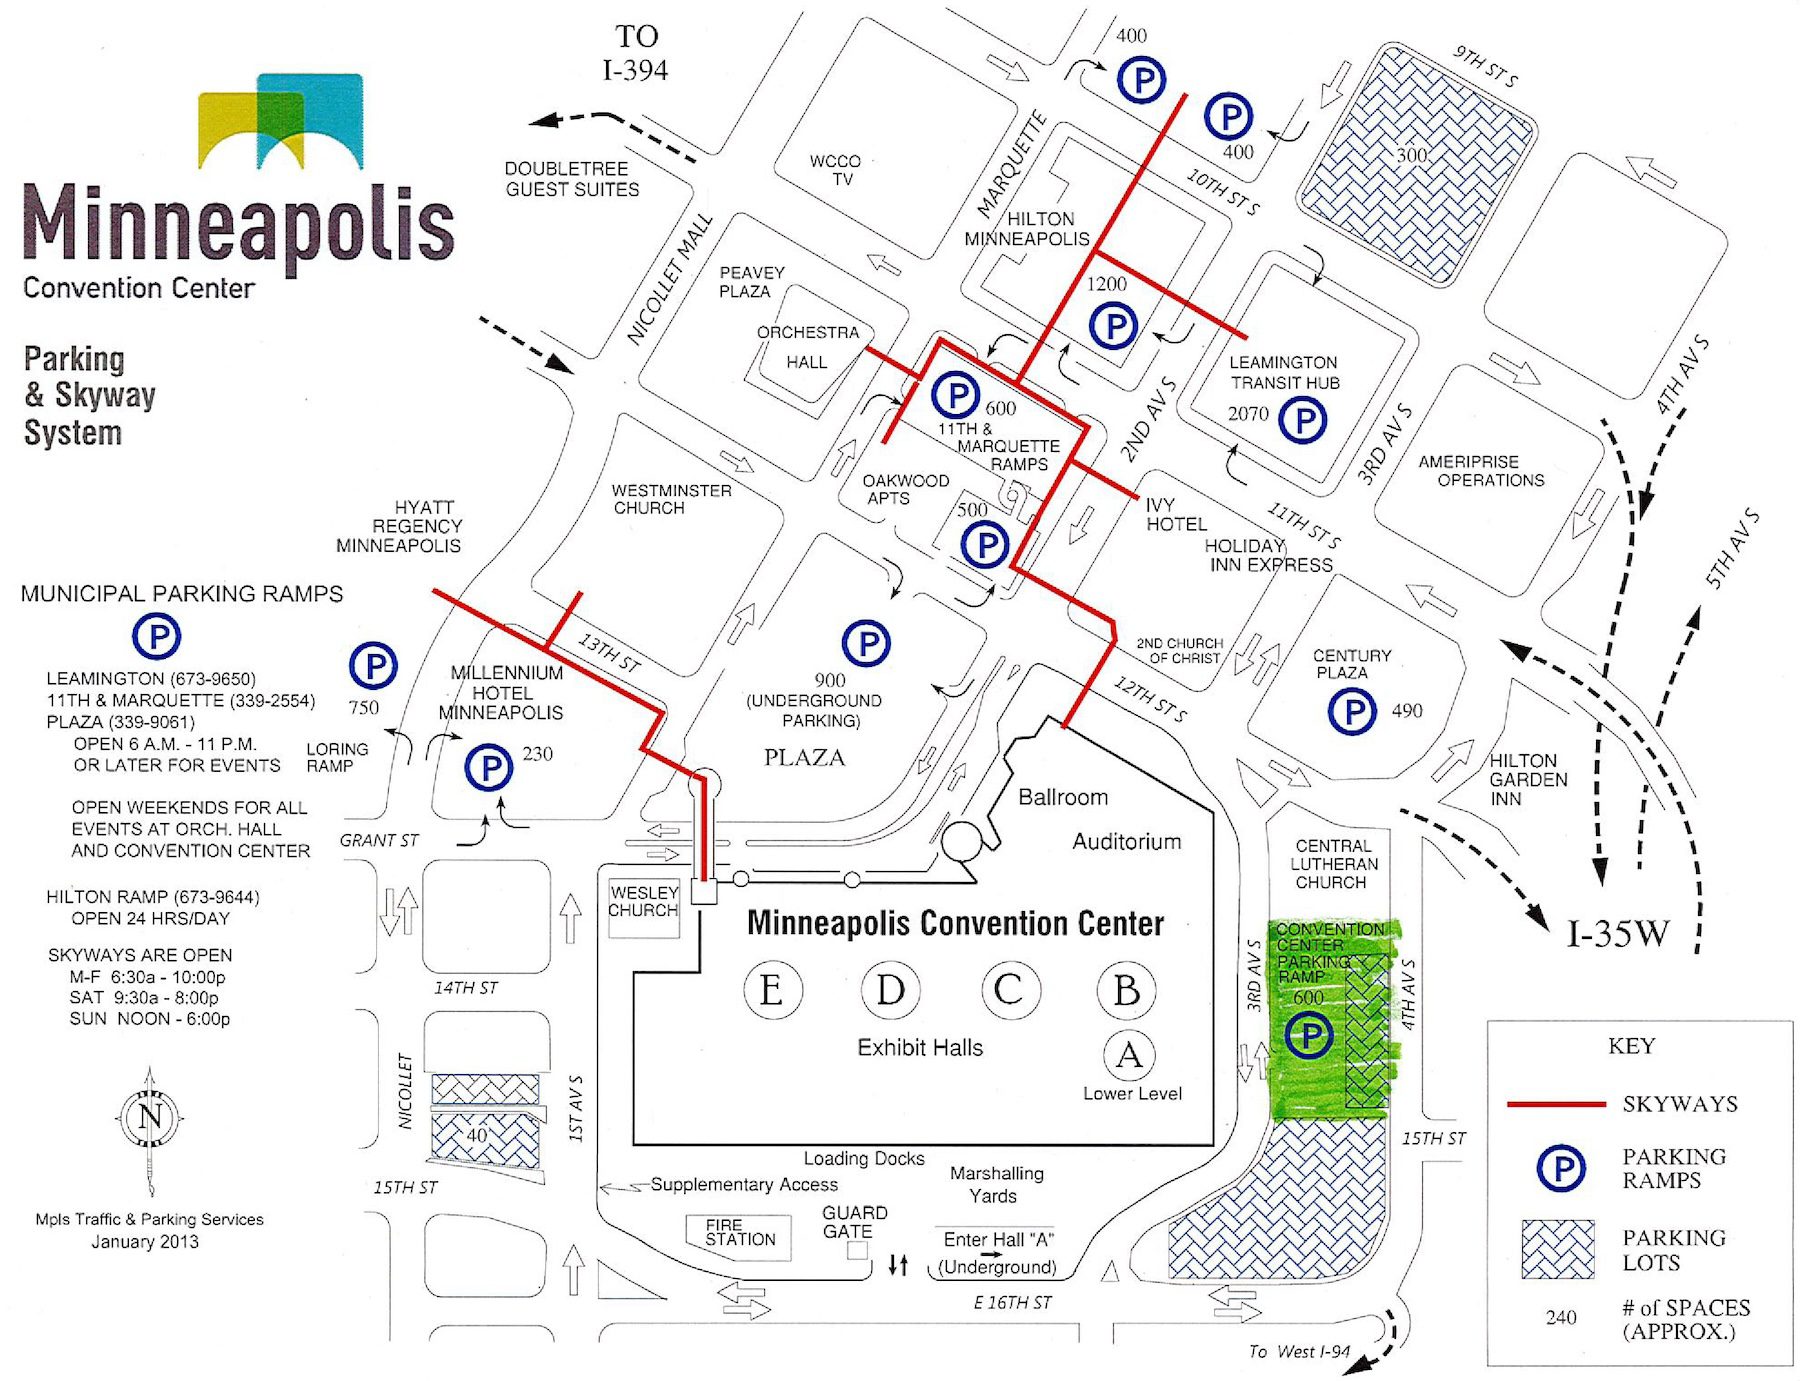 Map of parking options near the Minneapolis Convention Center